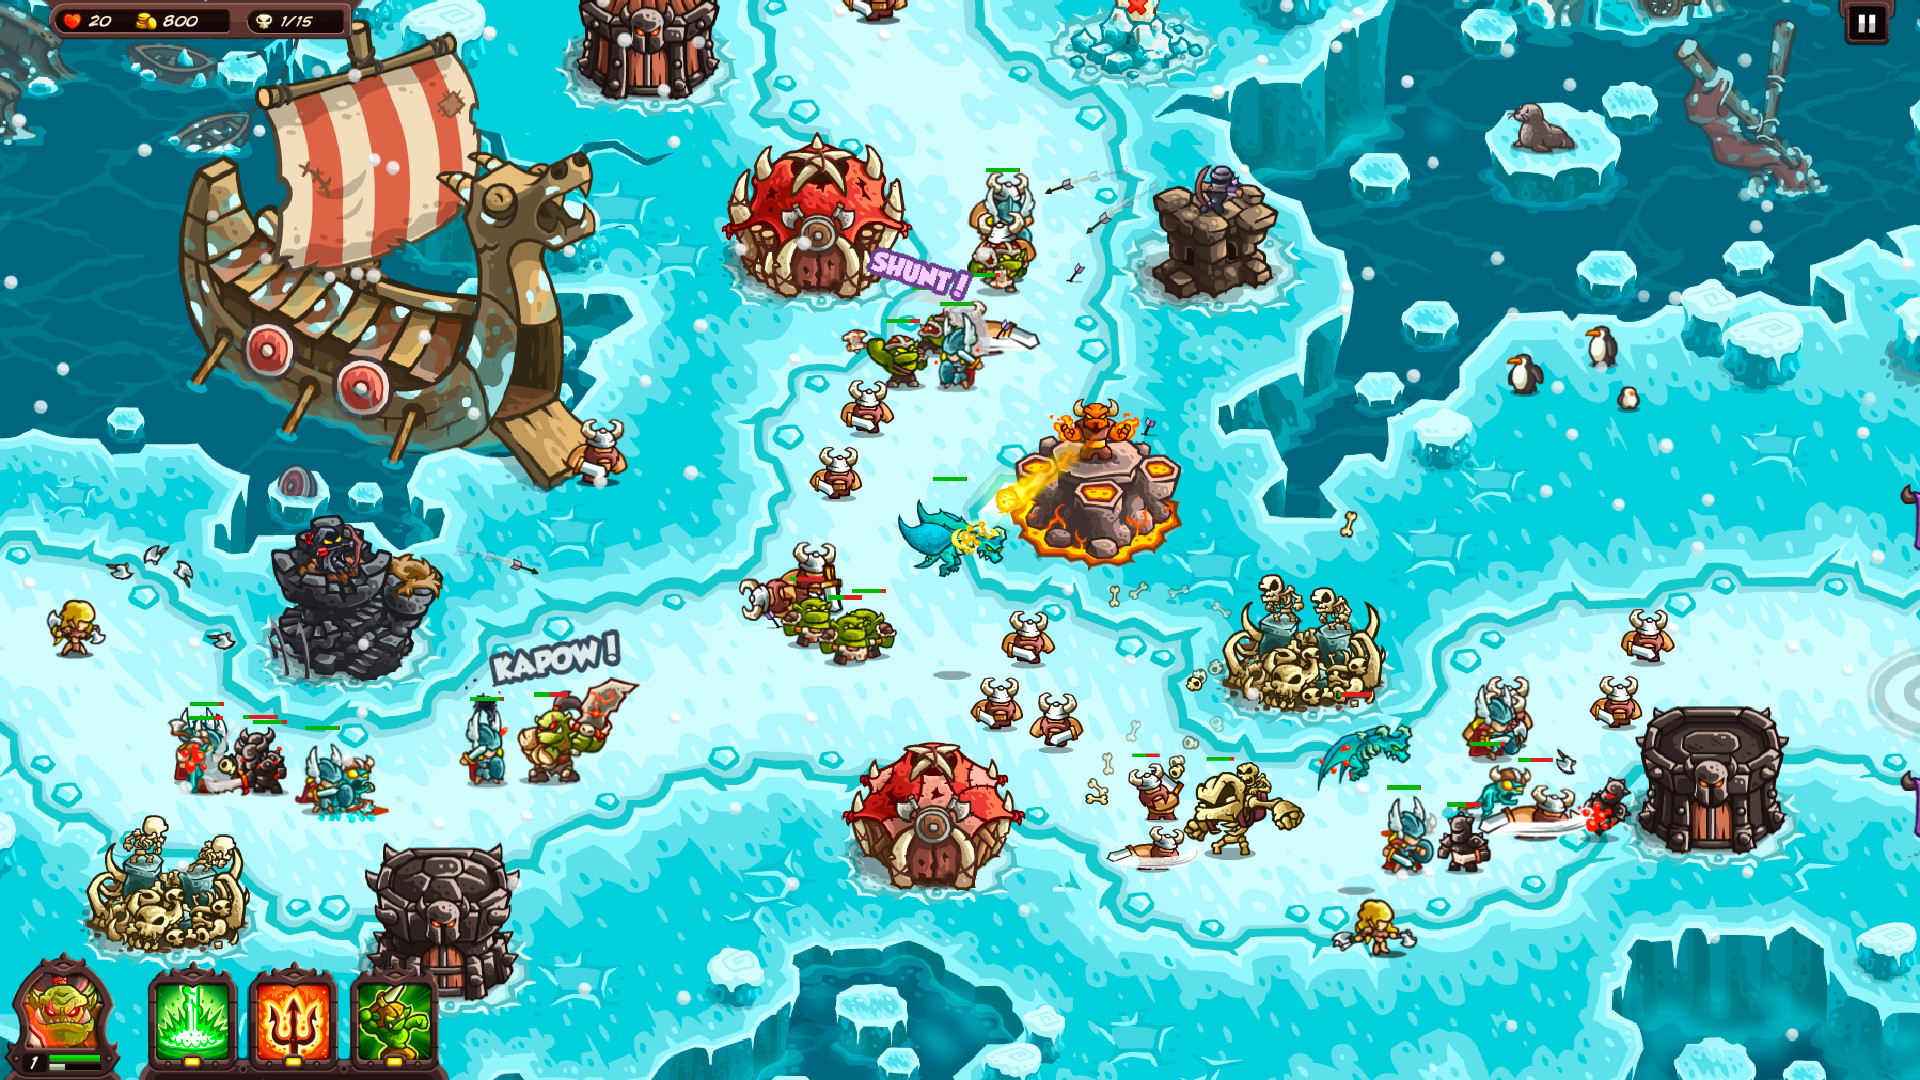 Best tower defense games: a bunch of monsters and vikings fighting in the arctic in Kingdom Rush Vengeance.